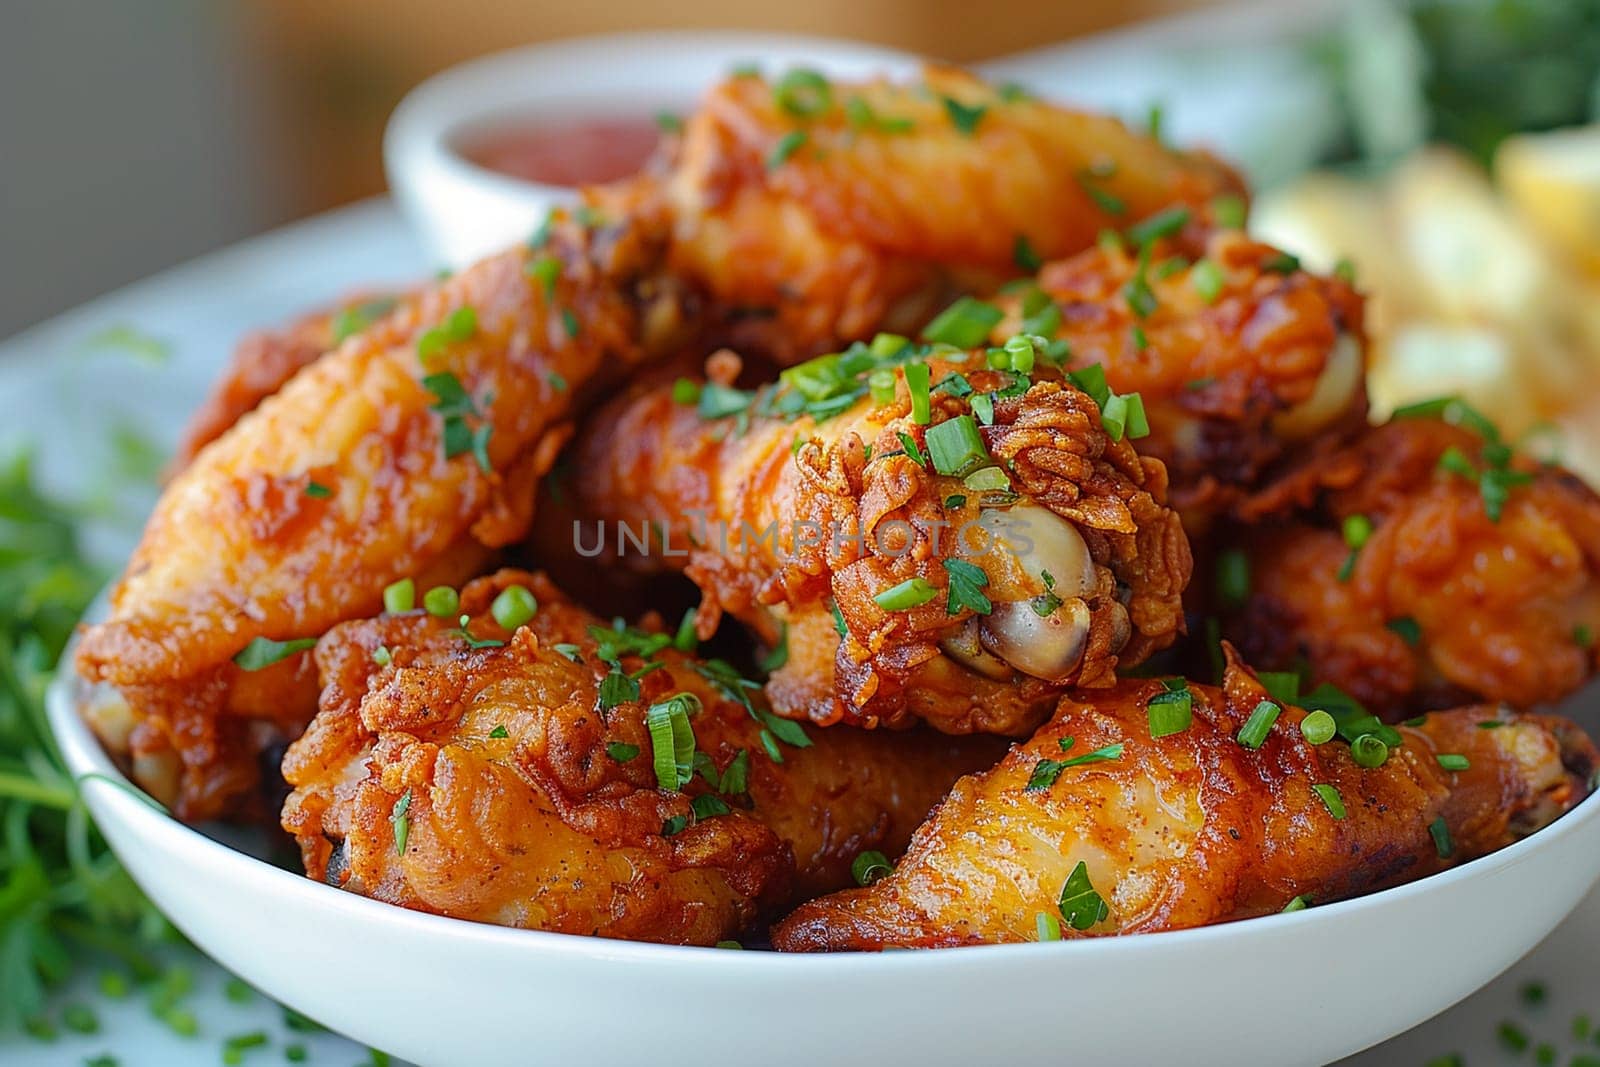 Delicious fried chicken wings garnished with green onions served. Appetizing by Yevhen89